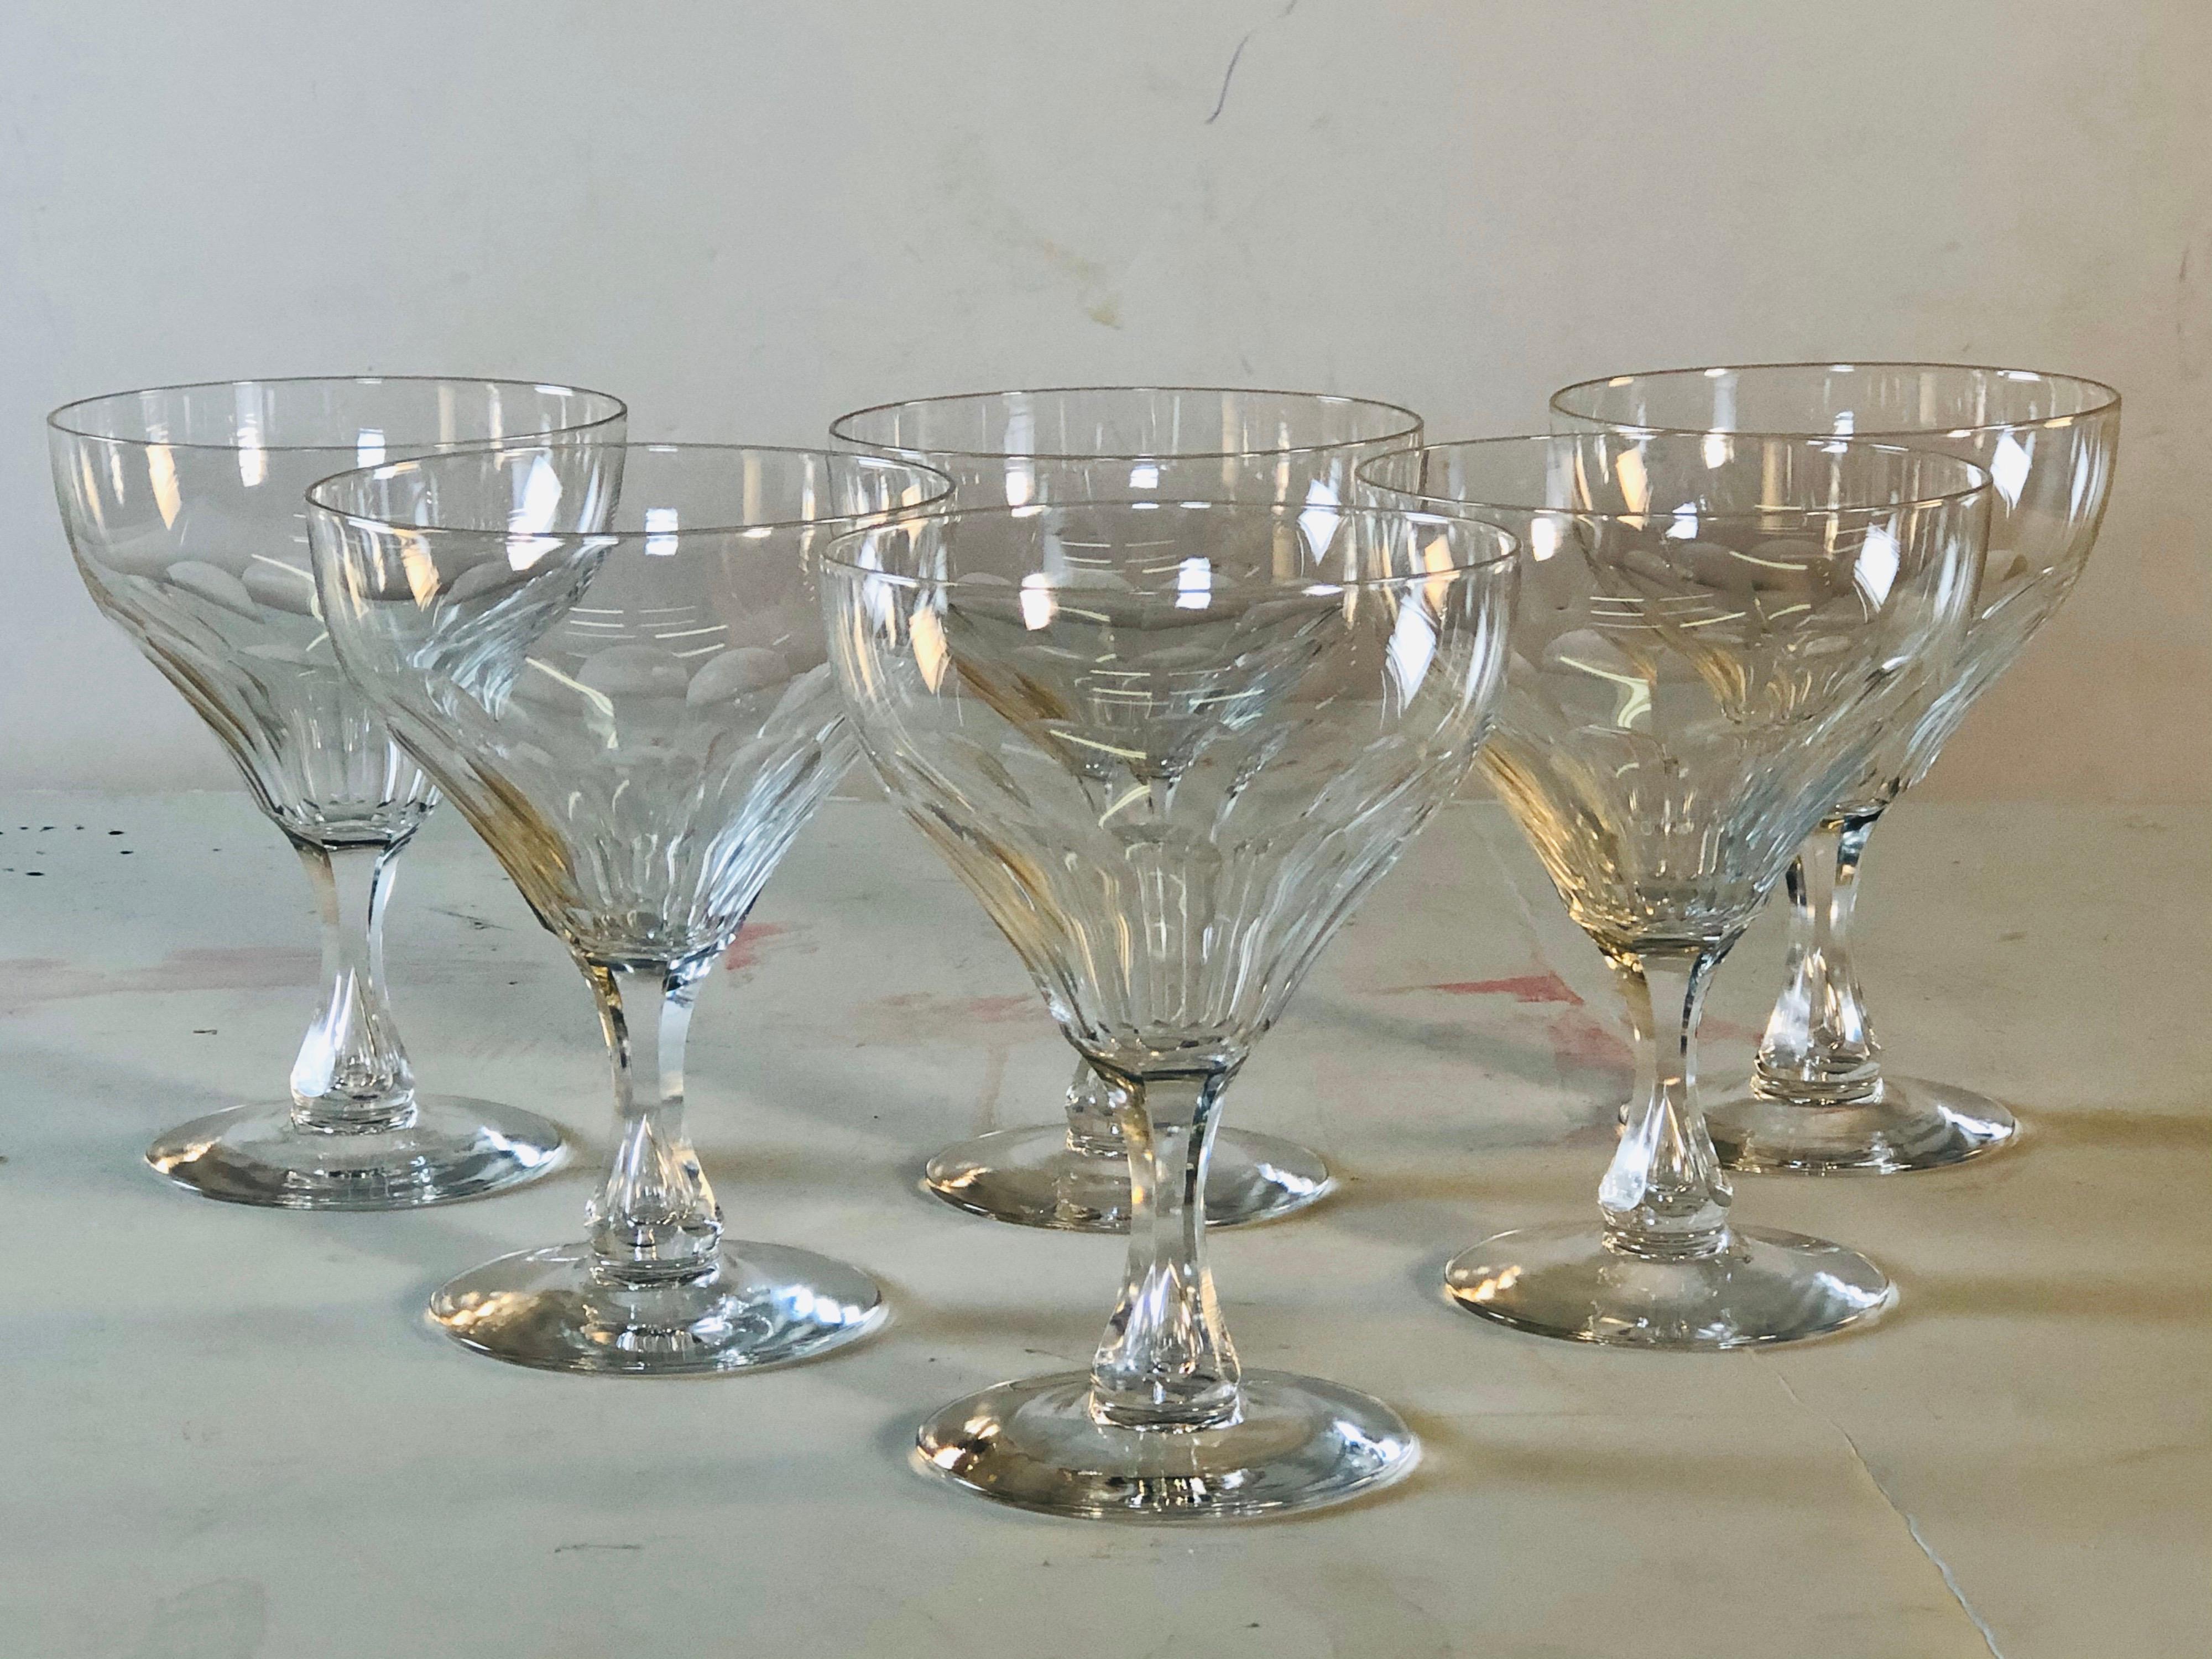 Vintage 1950s hand blown teardrop stem and mitred bowl coupes. Delicate and elegant coupe stems. No marks. Excellent condition.